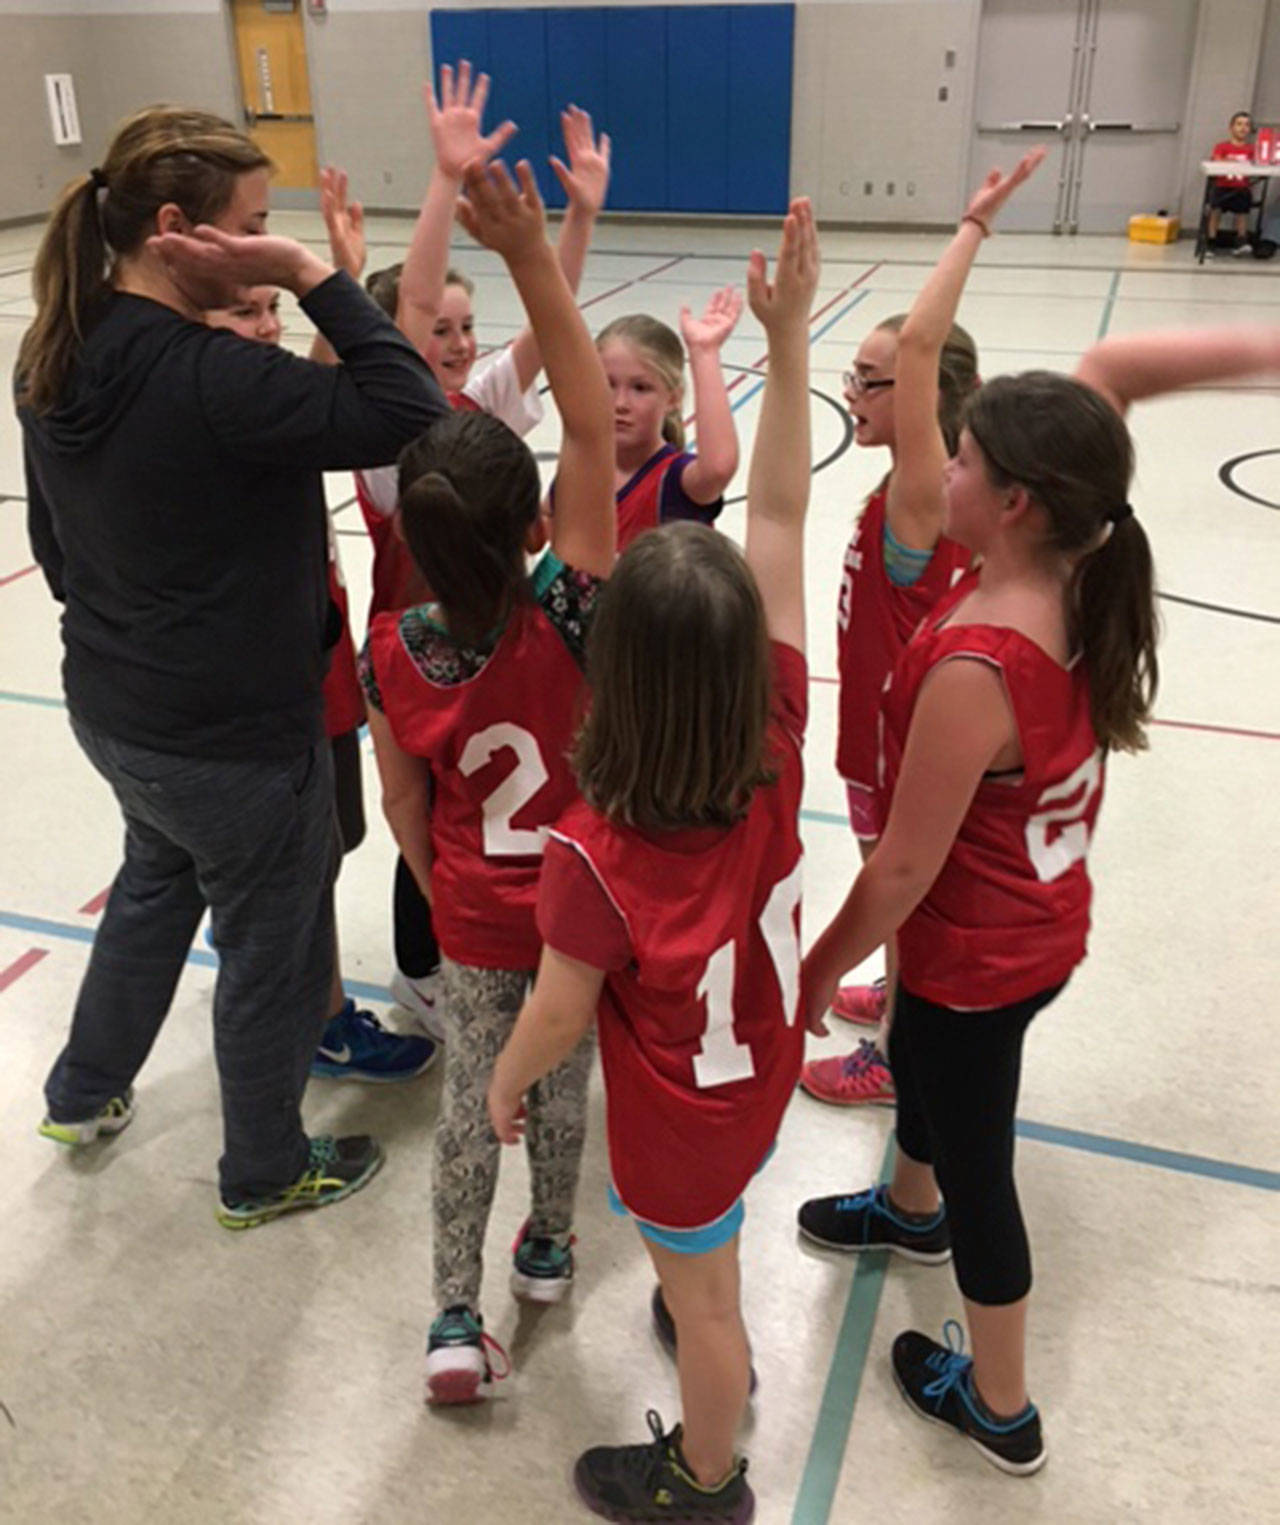 A group of youngster get ready to begin a game in a past season. Registration of the 2020 youth basketball season is now underway. (Photo by Carrie Monforte)